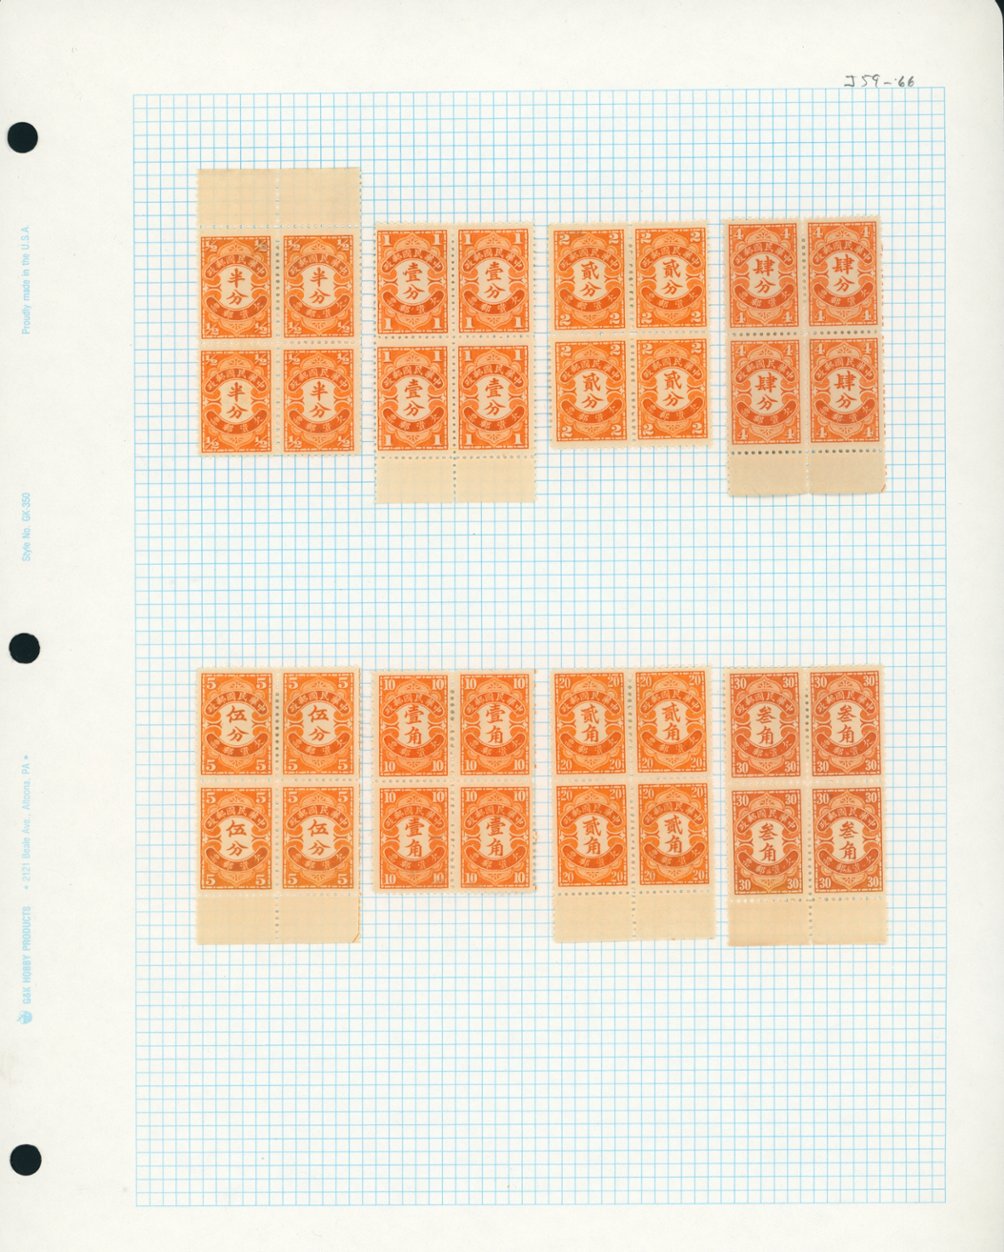 J59-66 in blocks of four on a page